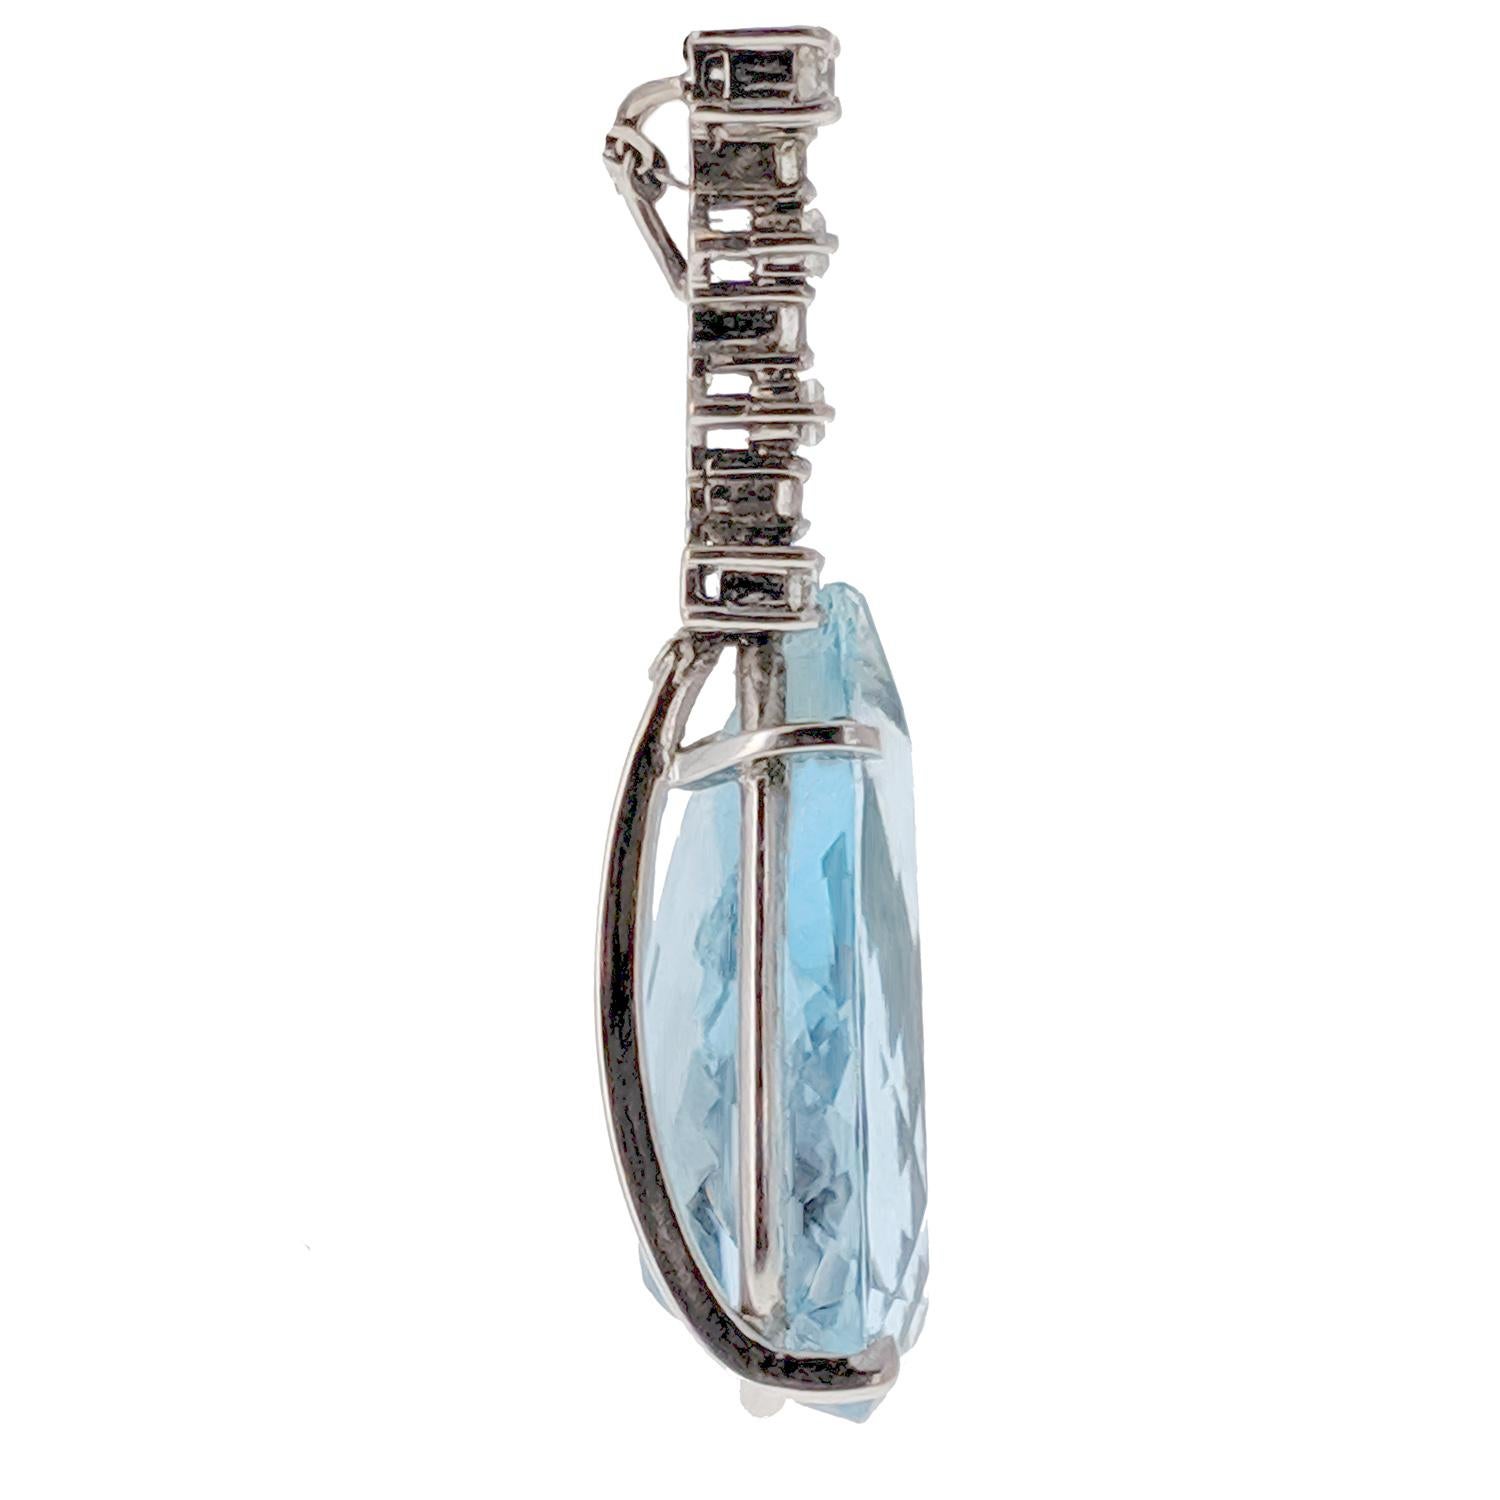 Suspending a pear-shaped aquamarine, of approximately 18 carats and topped with round-cut and baguette-cut diamond element. Mounted in 18k white gold, with maker's mark 